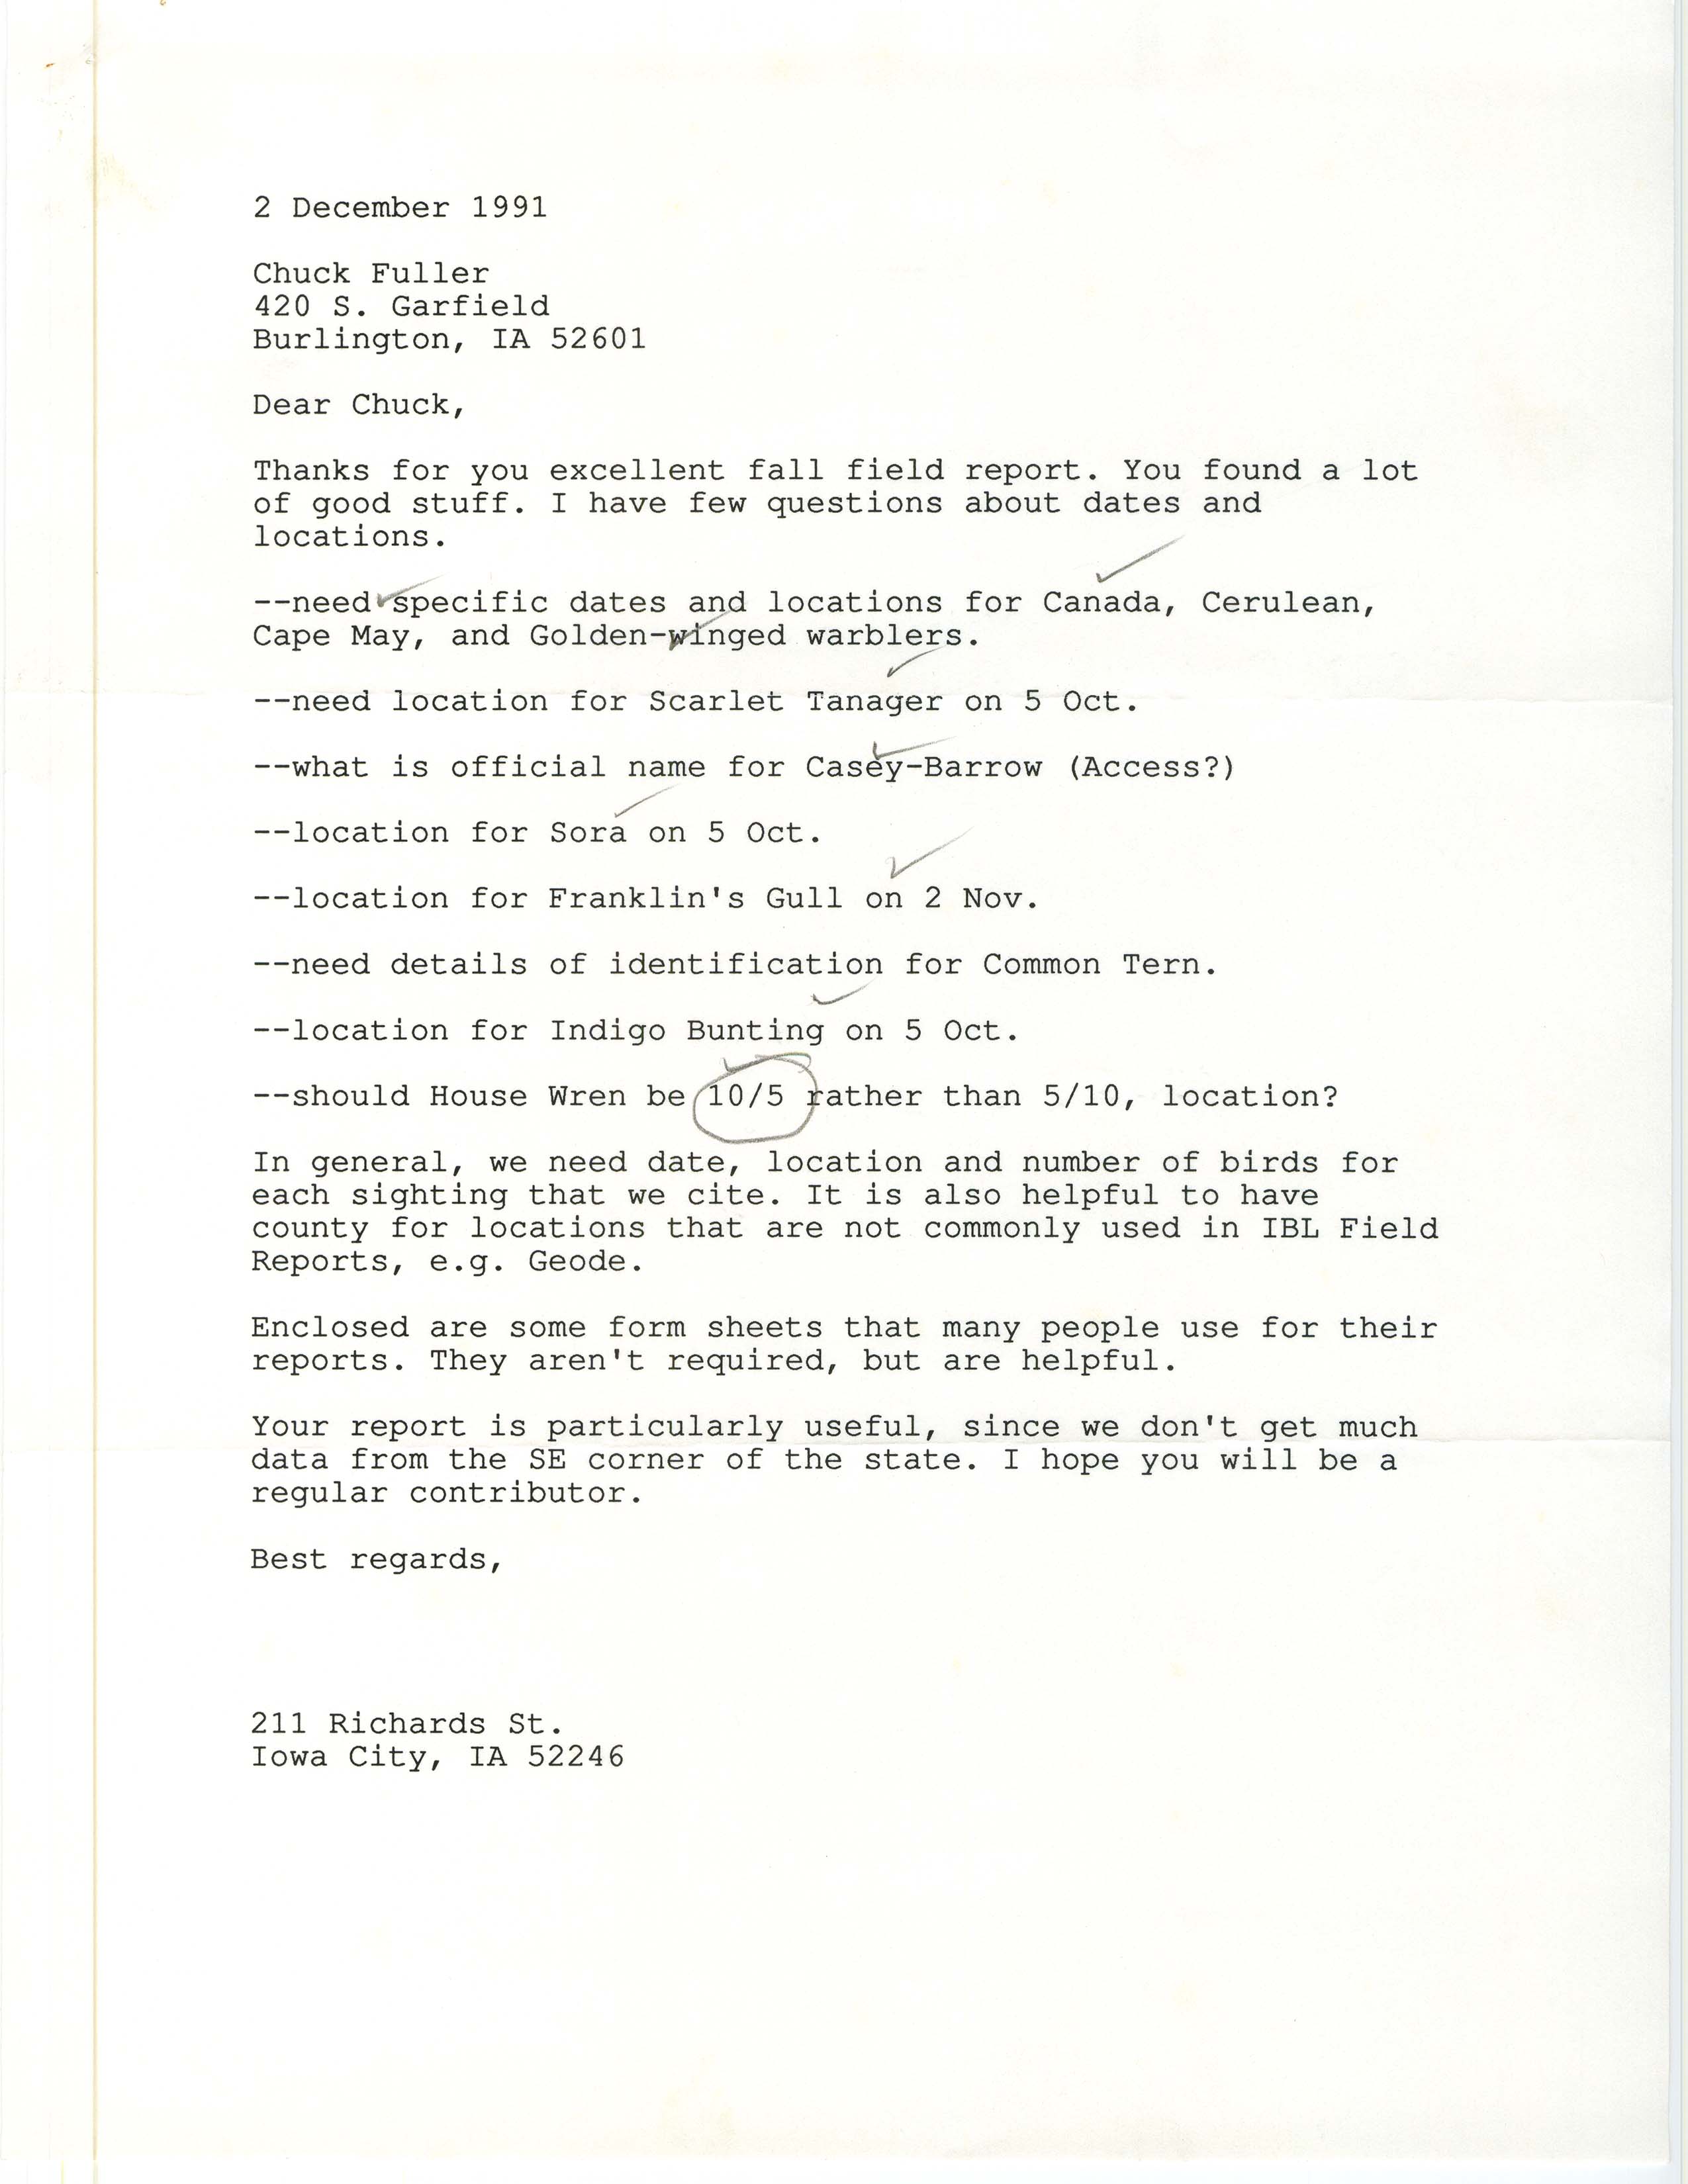 Thomas H. Kent letter to Charles Fuller requesting additional bird sighting details, December 2, 1991